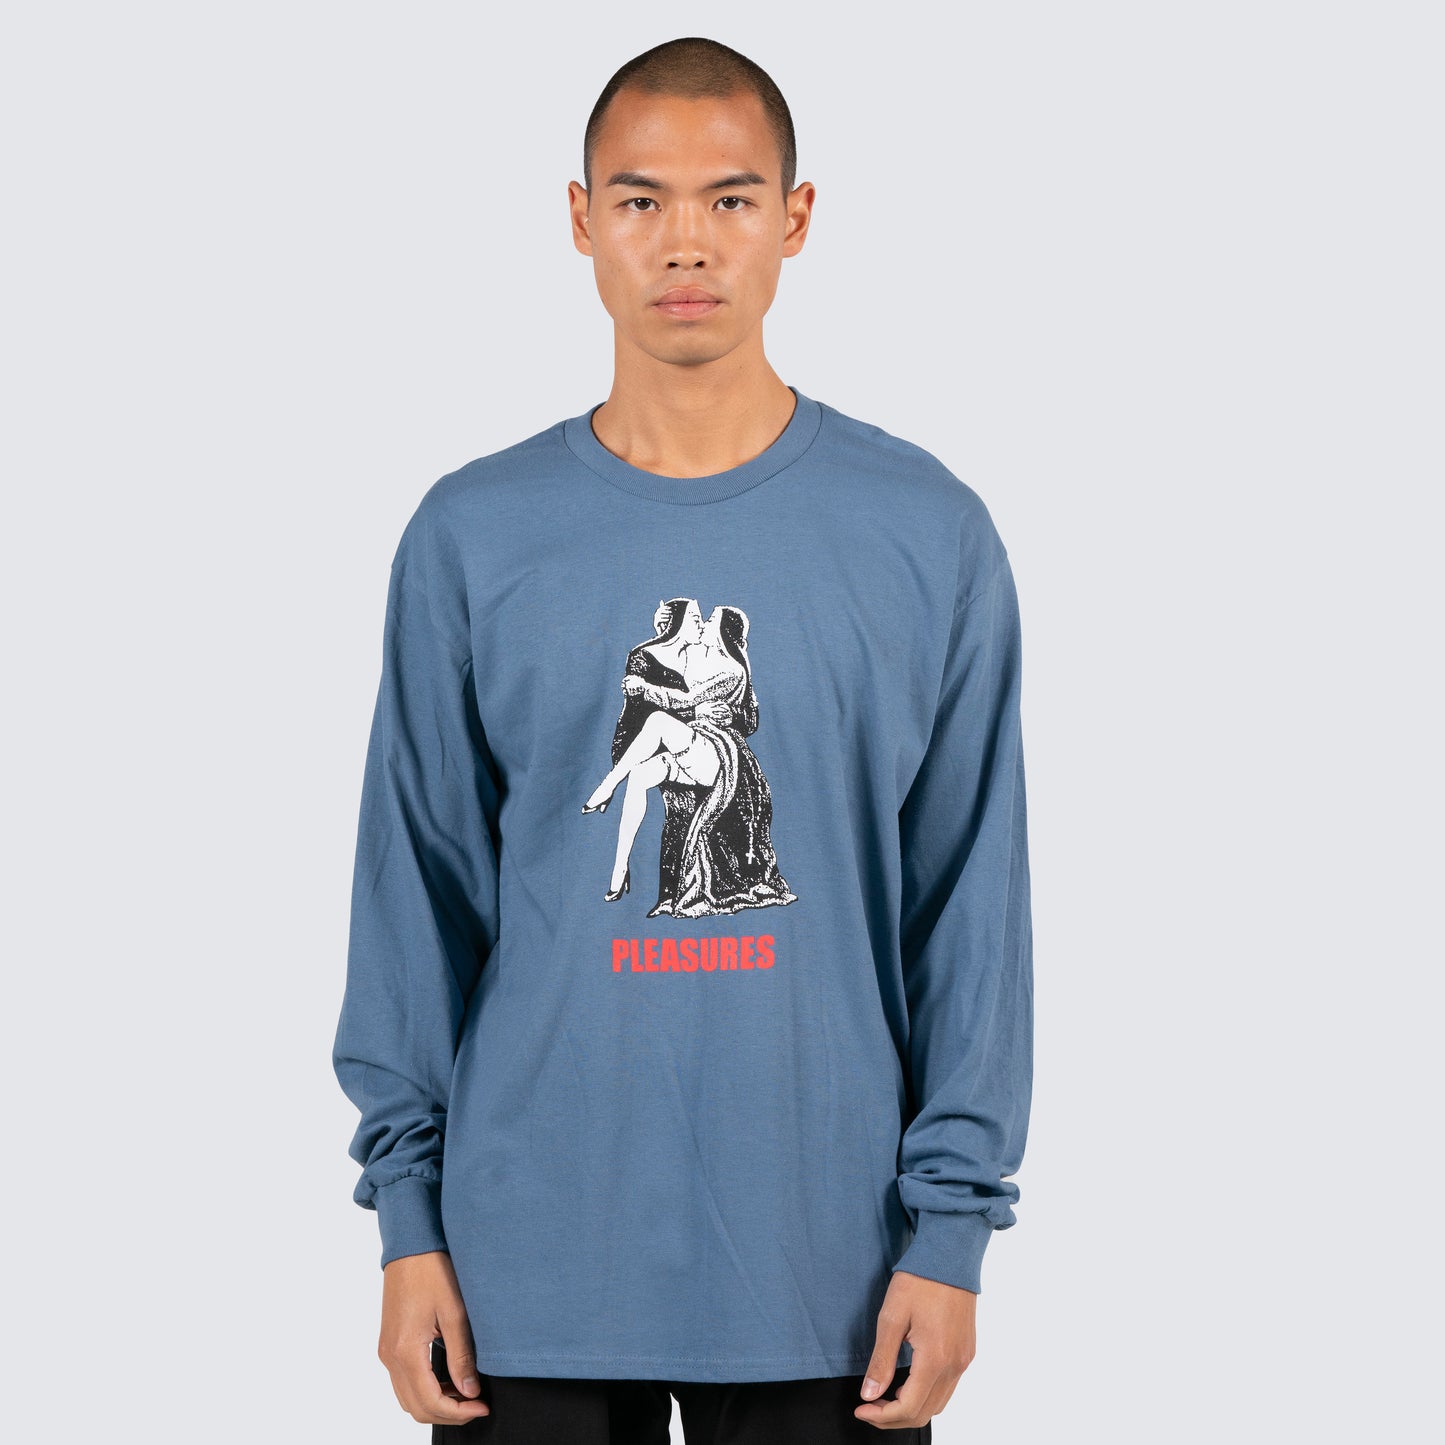 FRENCH KISS LONG SLEEVE